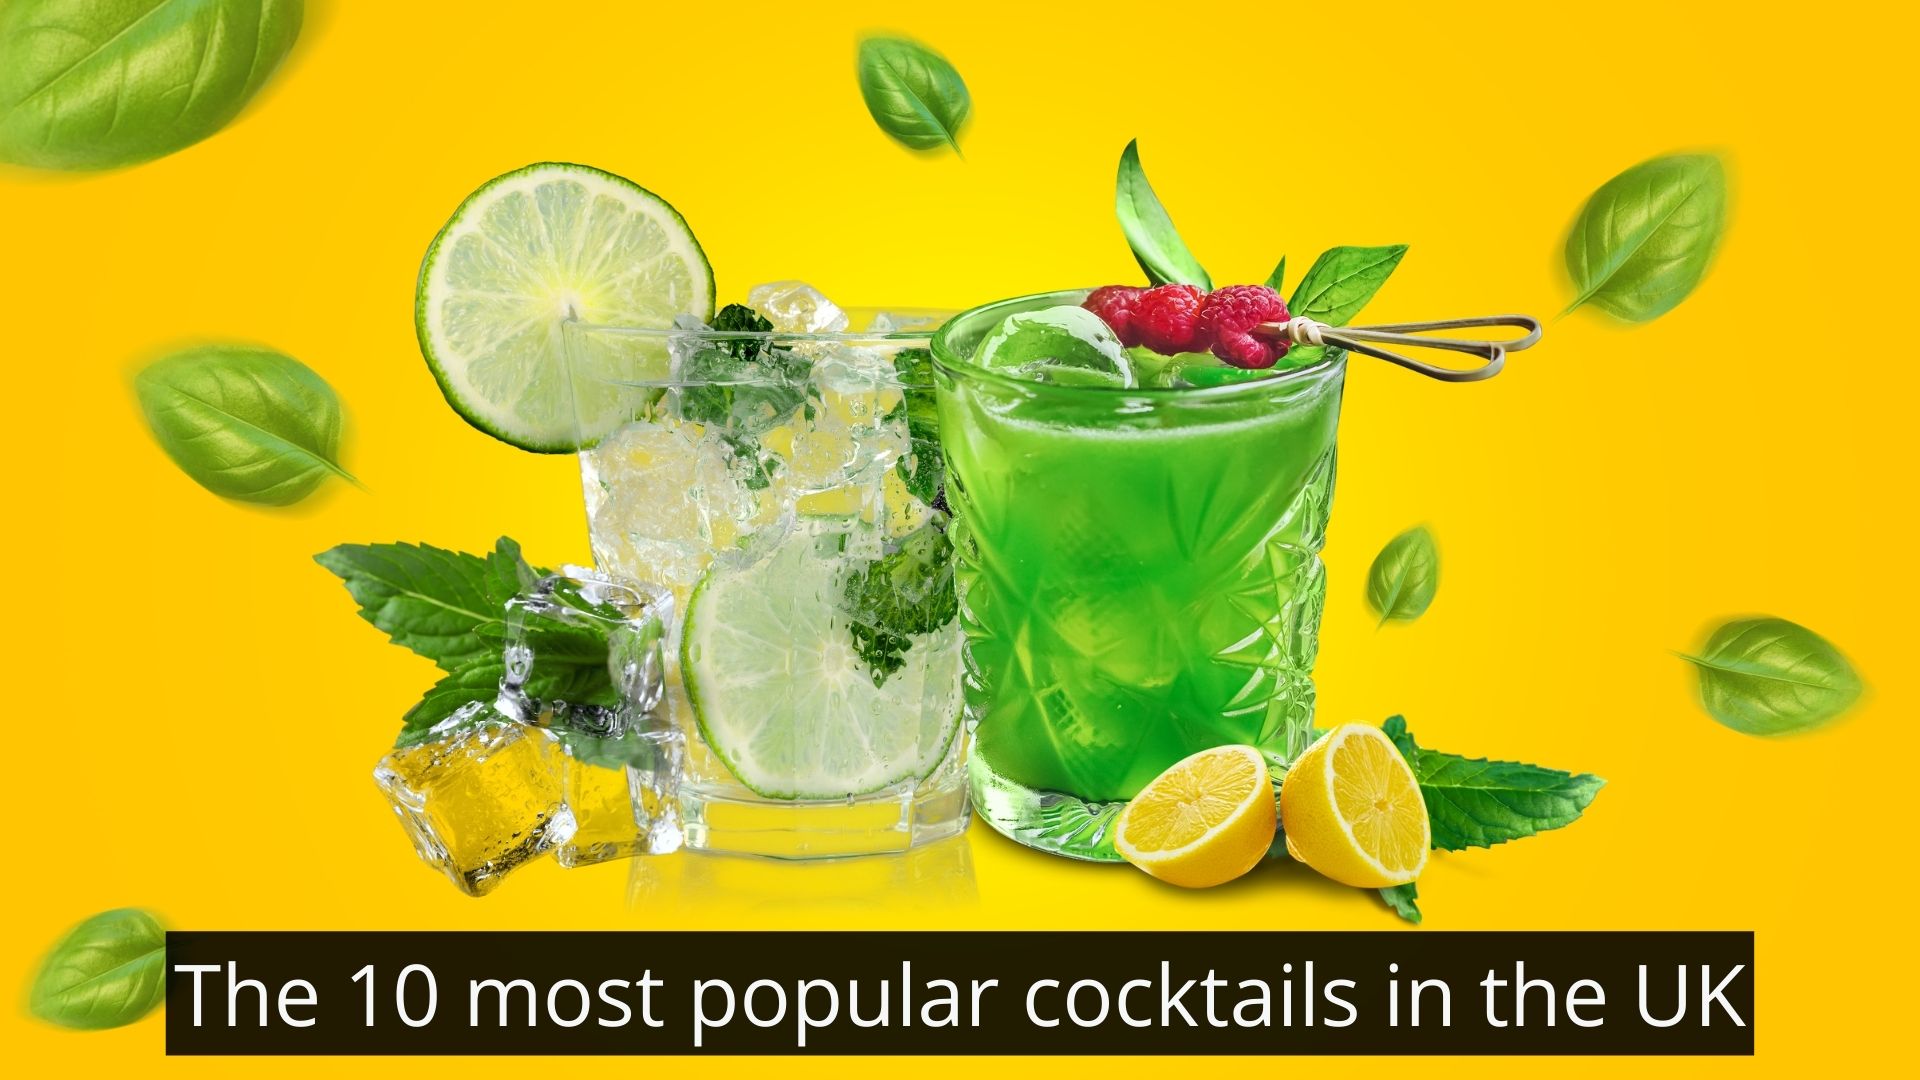 The 10 most popular cocktails in the UK